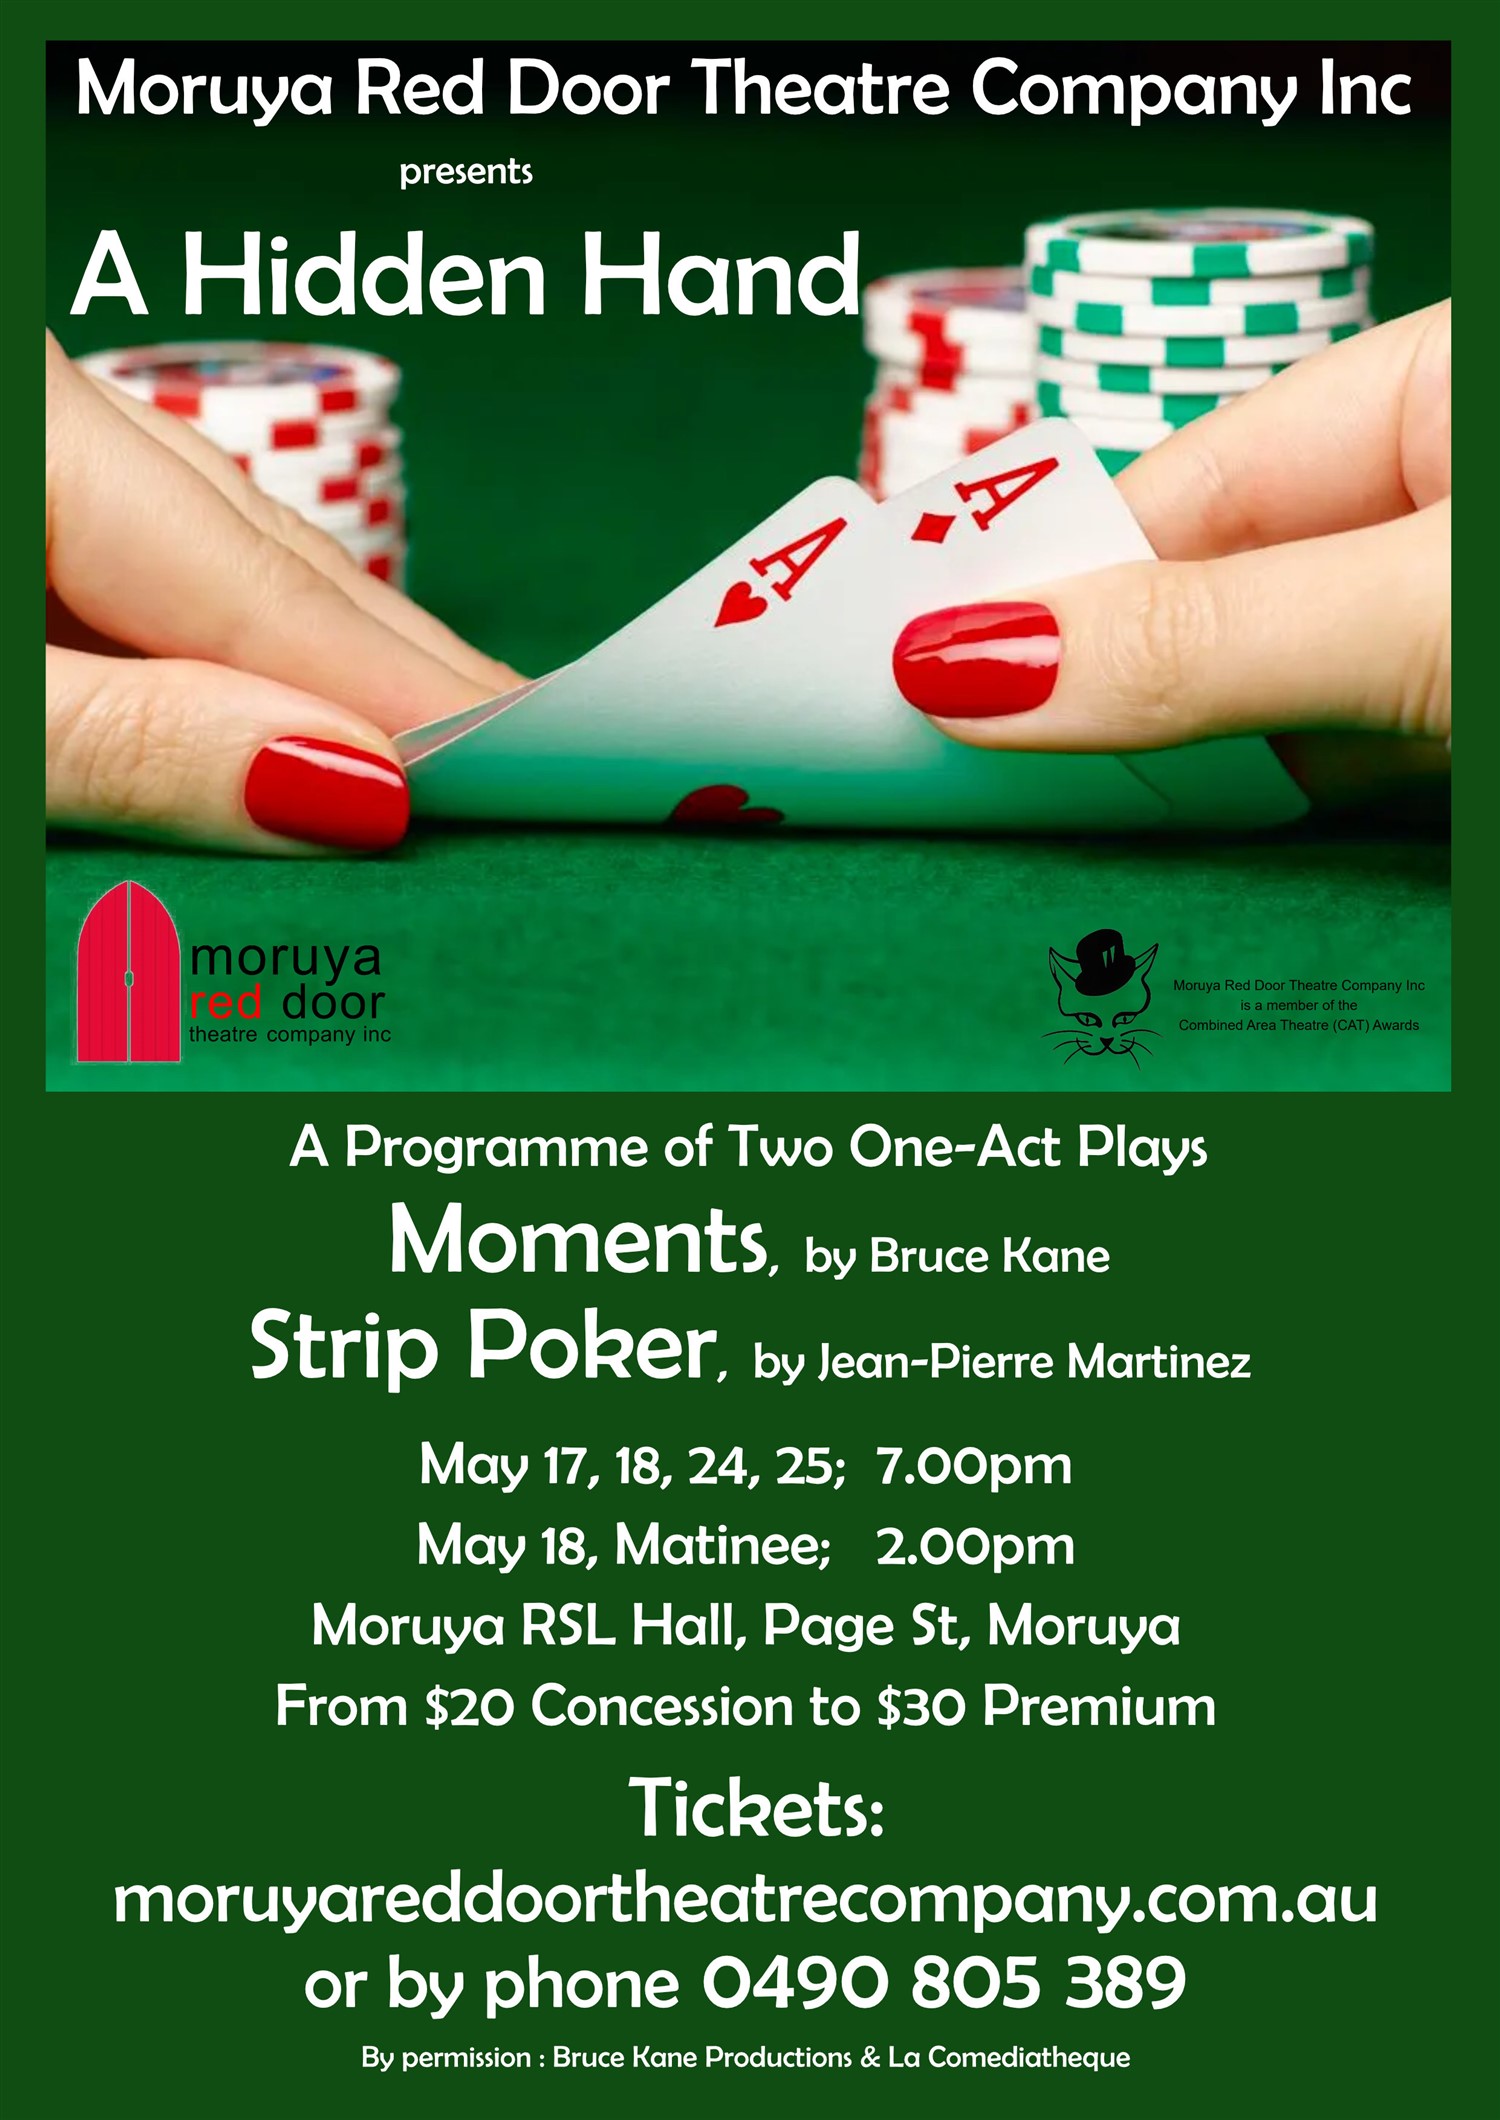 A Hidden Hand ~ Theatre Seating Our Matinee Performance on May 18, 14:00@Moruya RSL - Pick a seat, Buy tickets and Get information on Moruya Red Door Theatre 